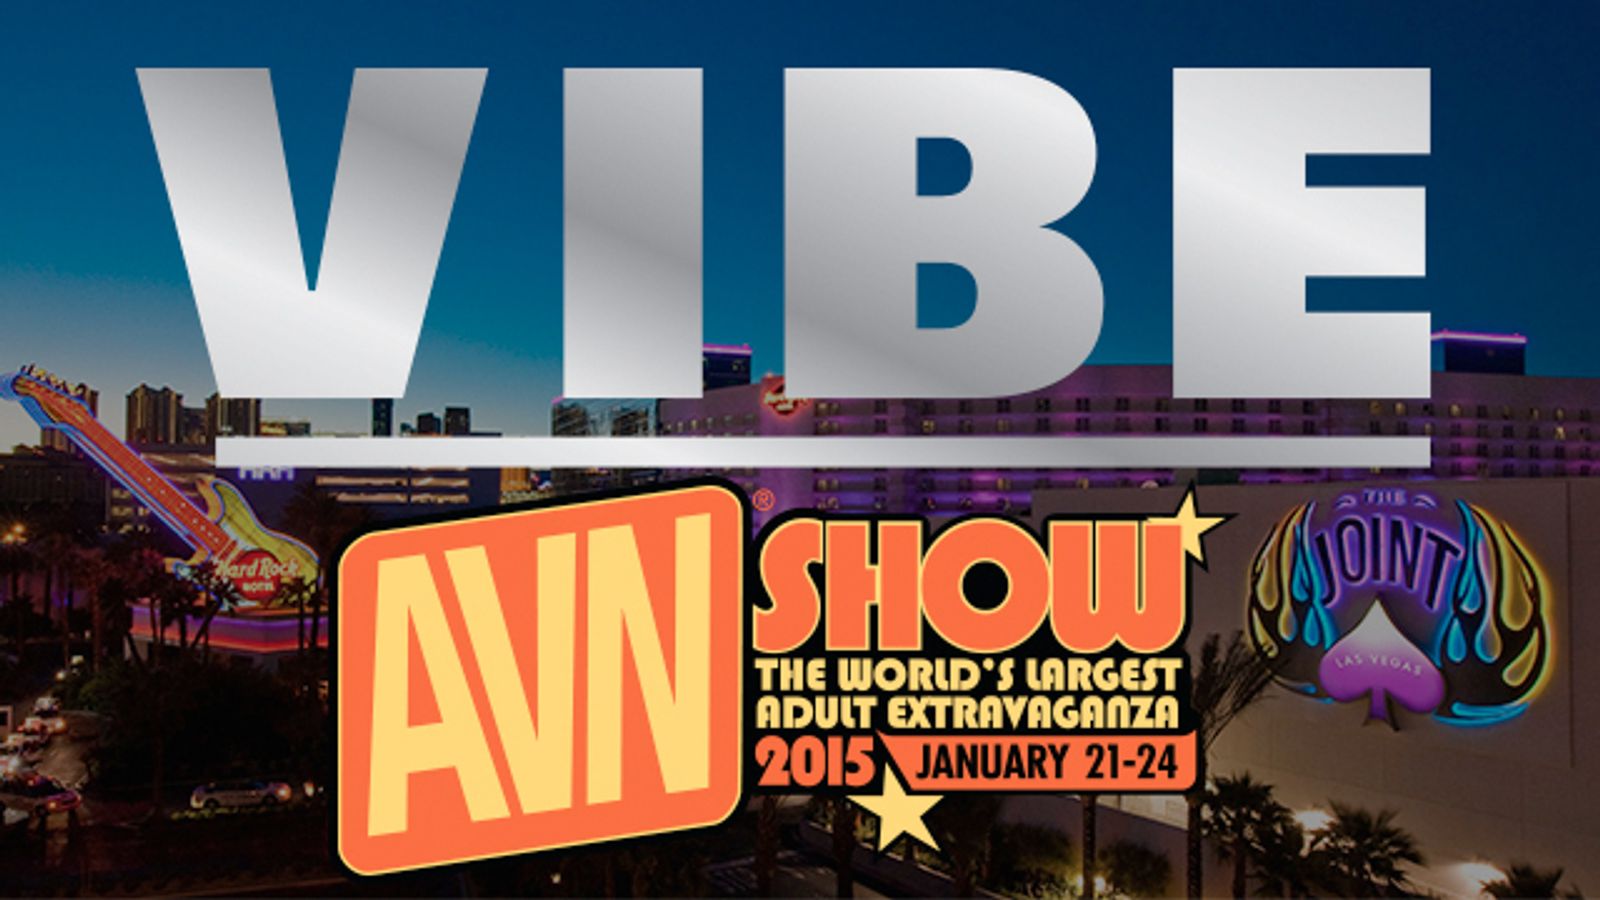 AVN VIBE Program Attracts Top Participants for 2015 AEE